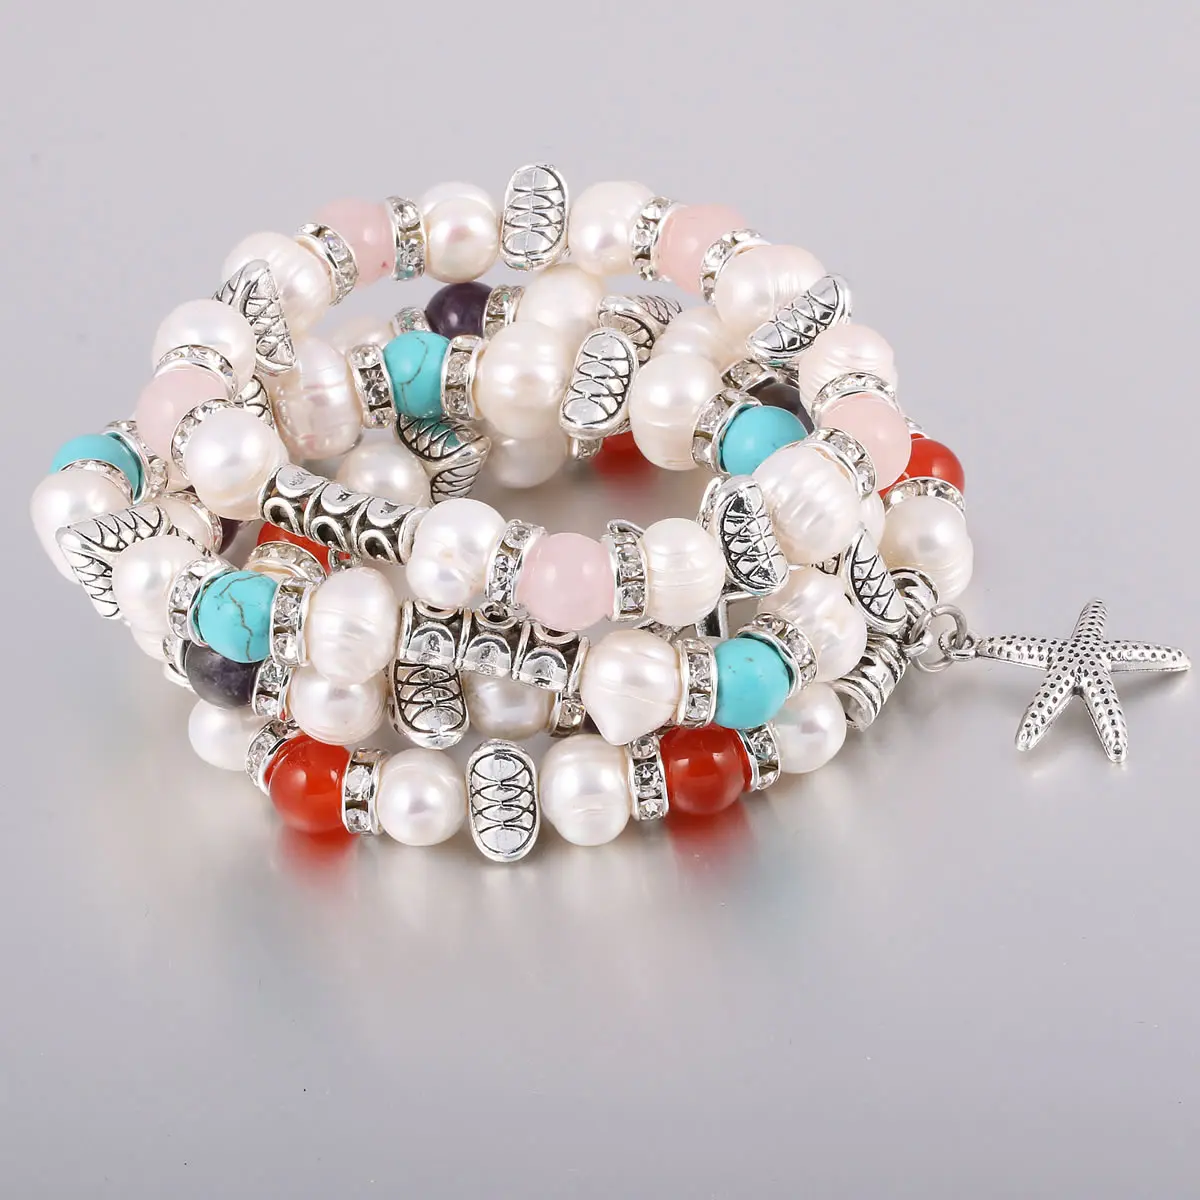 Starfish Shape Pendant Charm Freshwater Pearl Turquoise Zinc Alloy Beaded Bracelet Exquisite Accessories as a Gift for Women